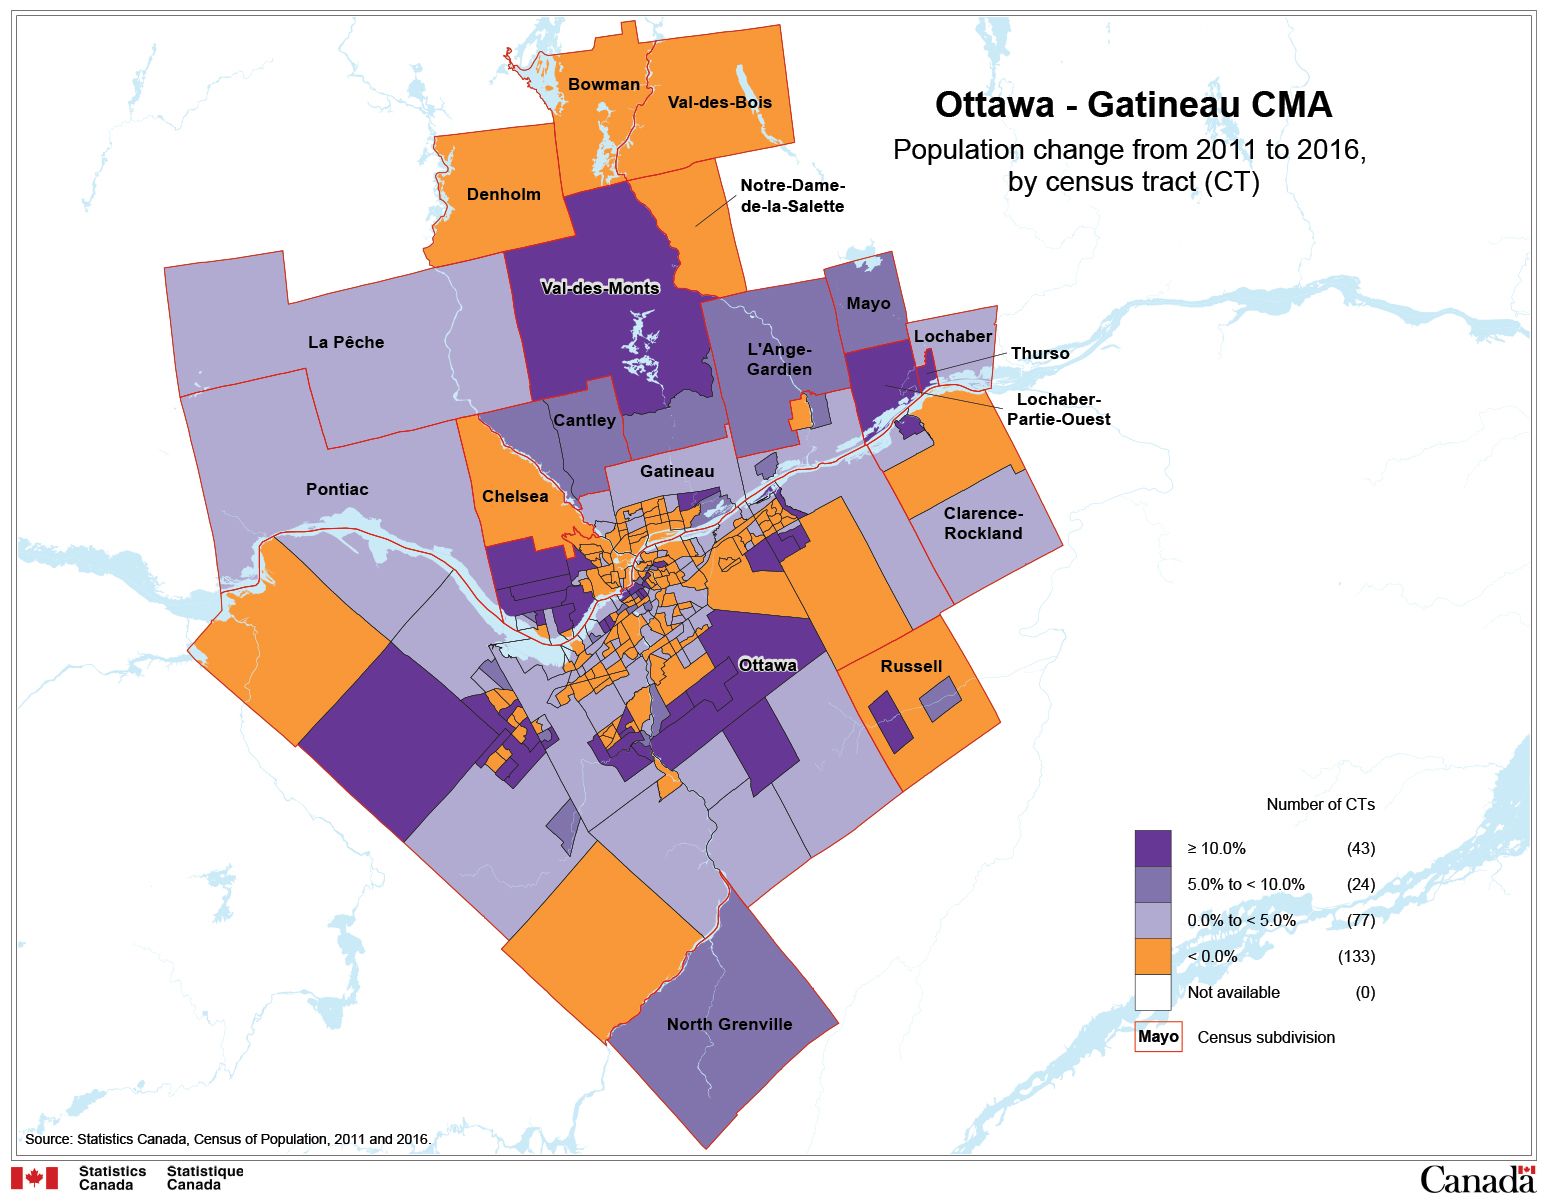 OttawaGatineau's population growth is midrange compared to rest of